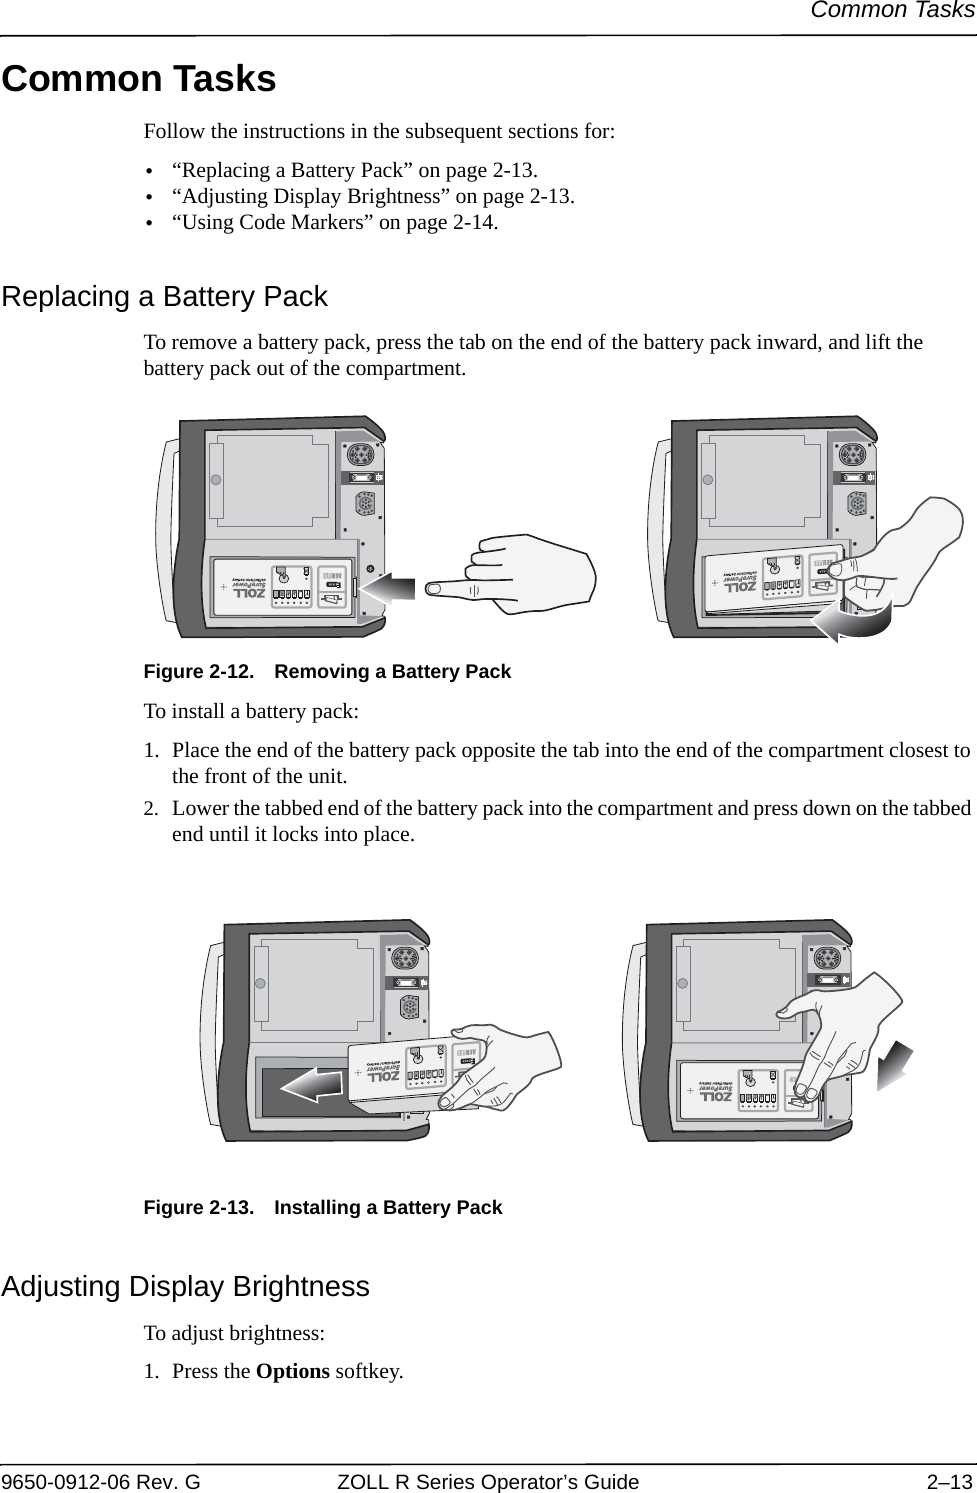 Common Tasks9650-0912-06 Rev. G ZOLL R Series Operator’s Guide 2–13Common TasksFollow the instructions in the subsequent sections for:•“Replacing a Battery Pack” on page 2-13.•“Adjusting Display Brightness” on page 2-13.•“Using Code Markers” on page 2-14.Replacing a Battery PackTo remove a battery pack, press the tab on the end of the battery pack inward, and lift the battery pack out of the compartment.Figure 2-12. Removing a Battery PackTo install a battery pack:1. Place the end of the battery pack opposite the tab into the end of the compartment closest to the front of the unit. 2. Lower the tabbed end of the battery pack into the compartment and press down on the tabbed end until it locks into place.Figure 2-13. Installing a Battery PackAdjusting Display BrightnessTo adjust brightness:1. Press the Options softkey.??3P/3P/3P/3P/??3P/3P/3P/3P/